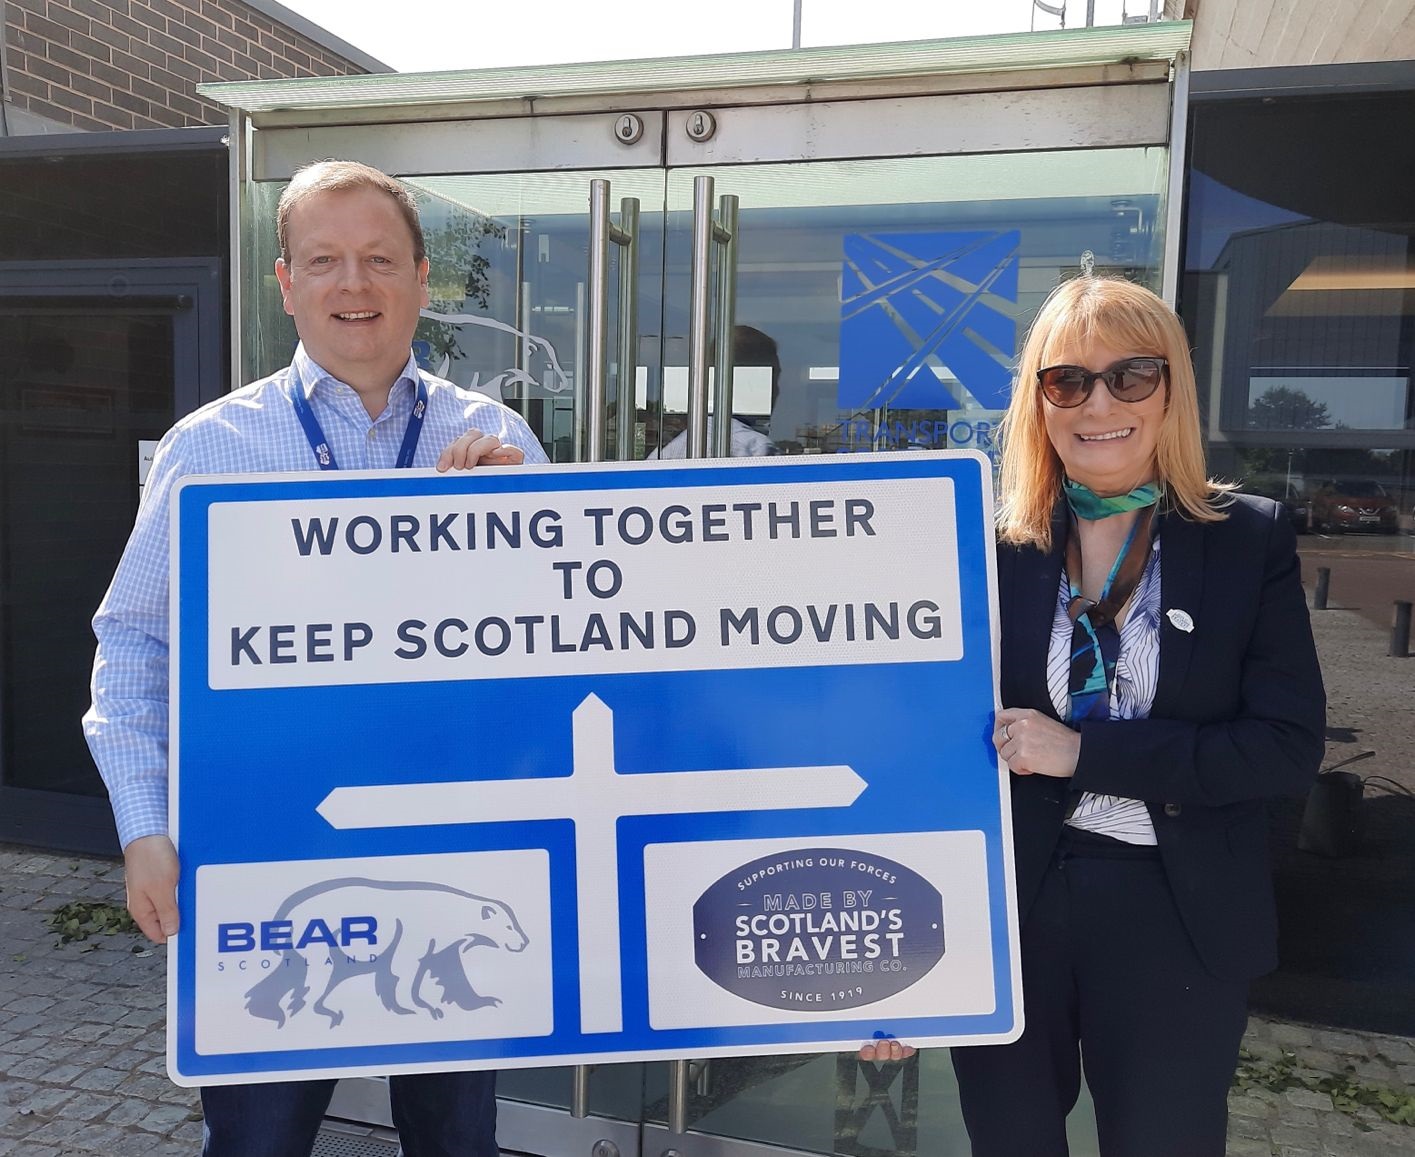 SCOTLAND’S BRAVEST MANUFACTURING COMPANY PRODUCES 15,000th ROAD SIGN FOR BEAR SCOTLAND